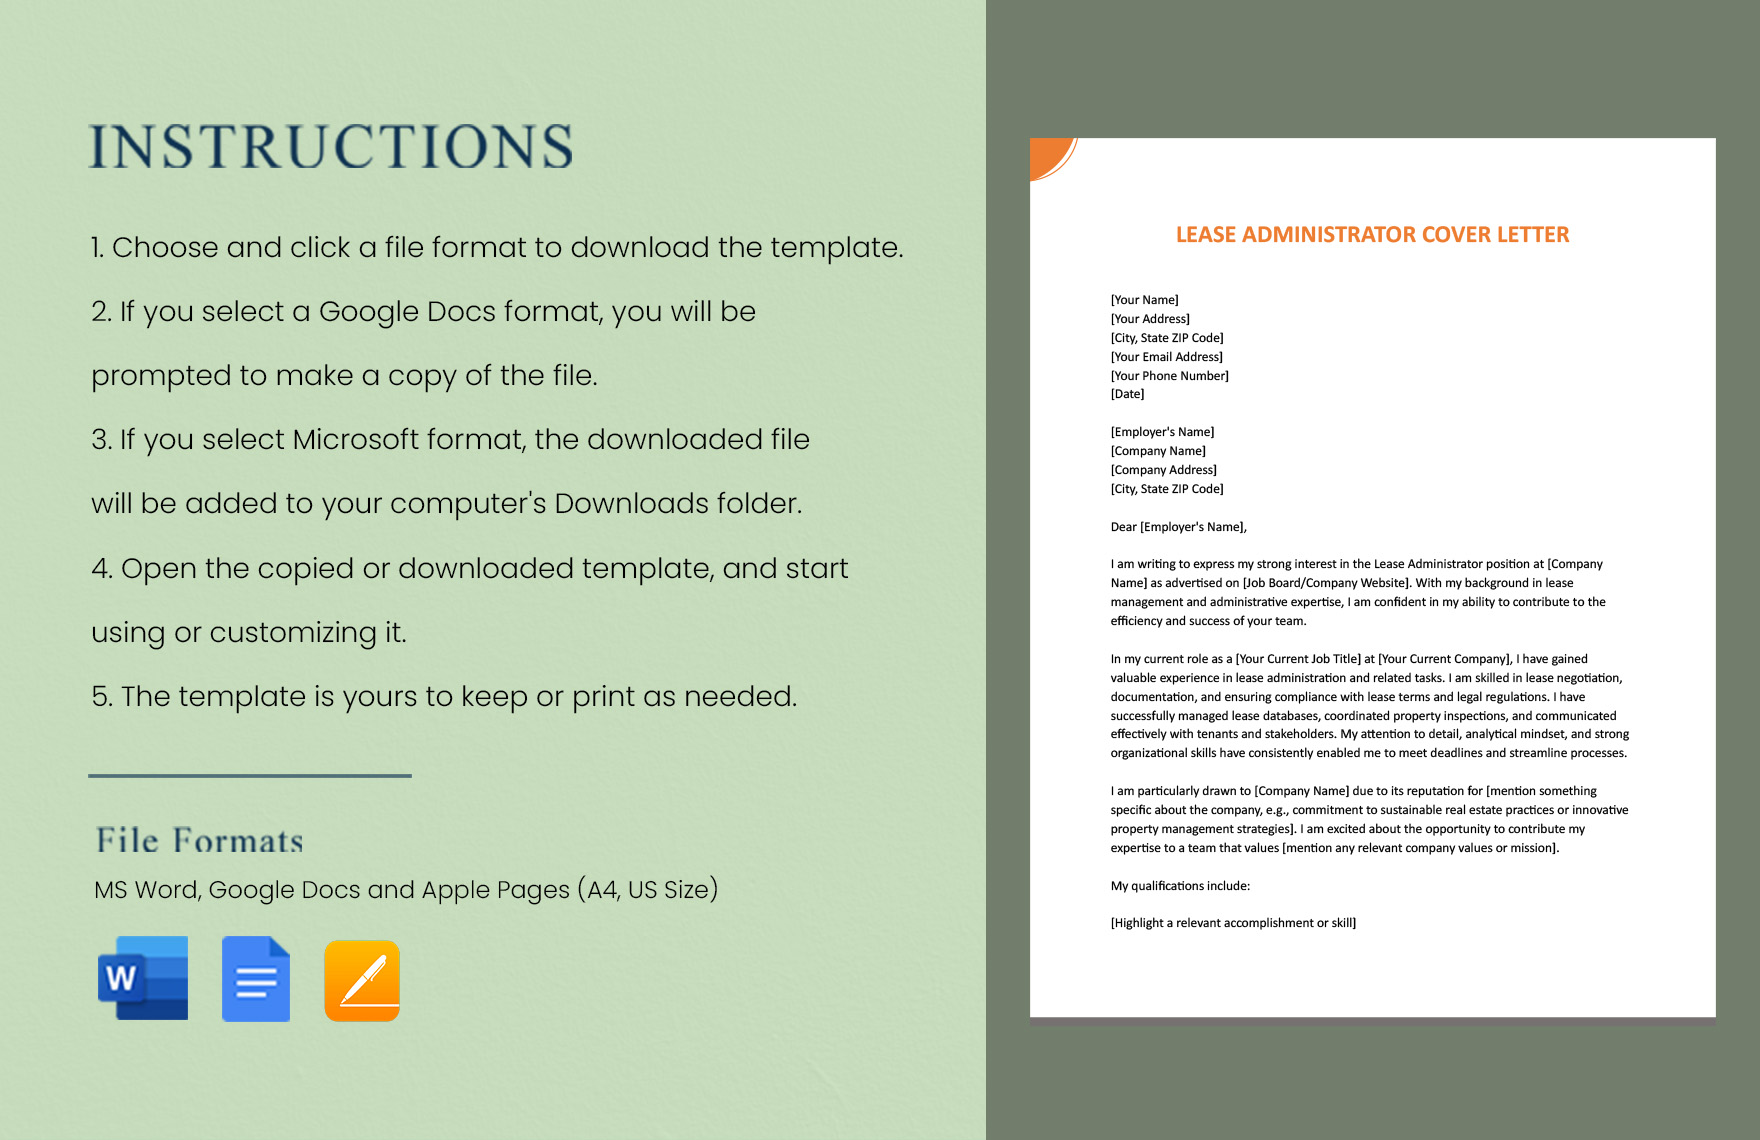 Lease Administrator Cover Letter